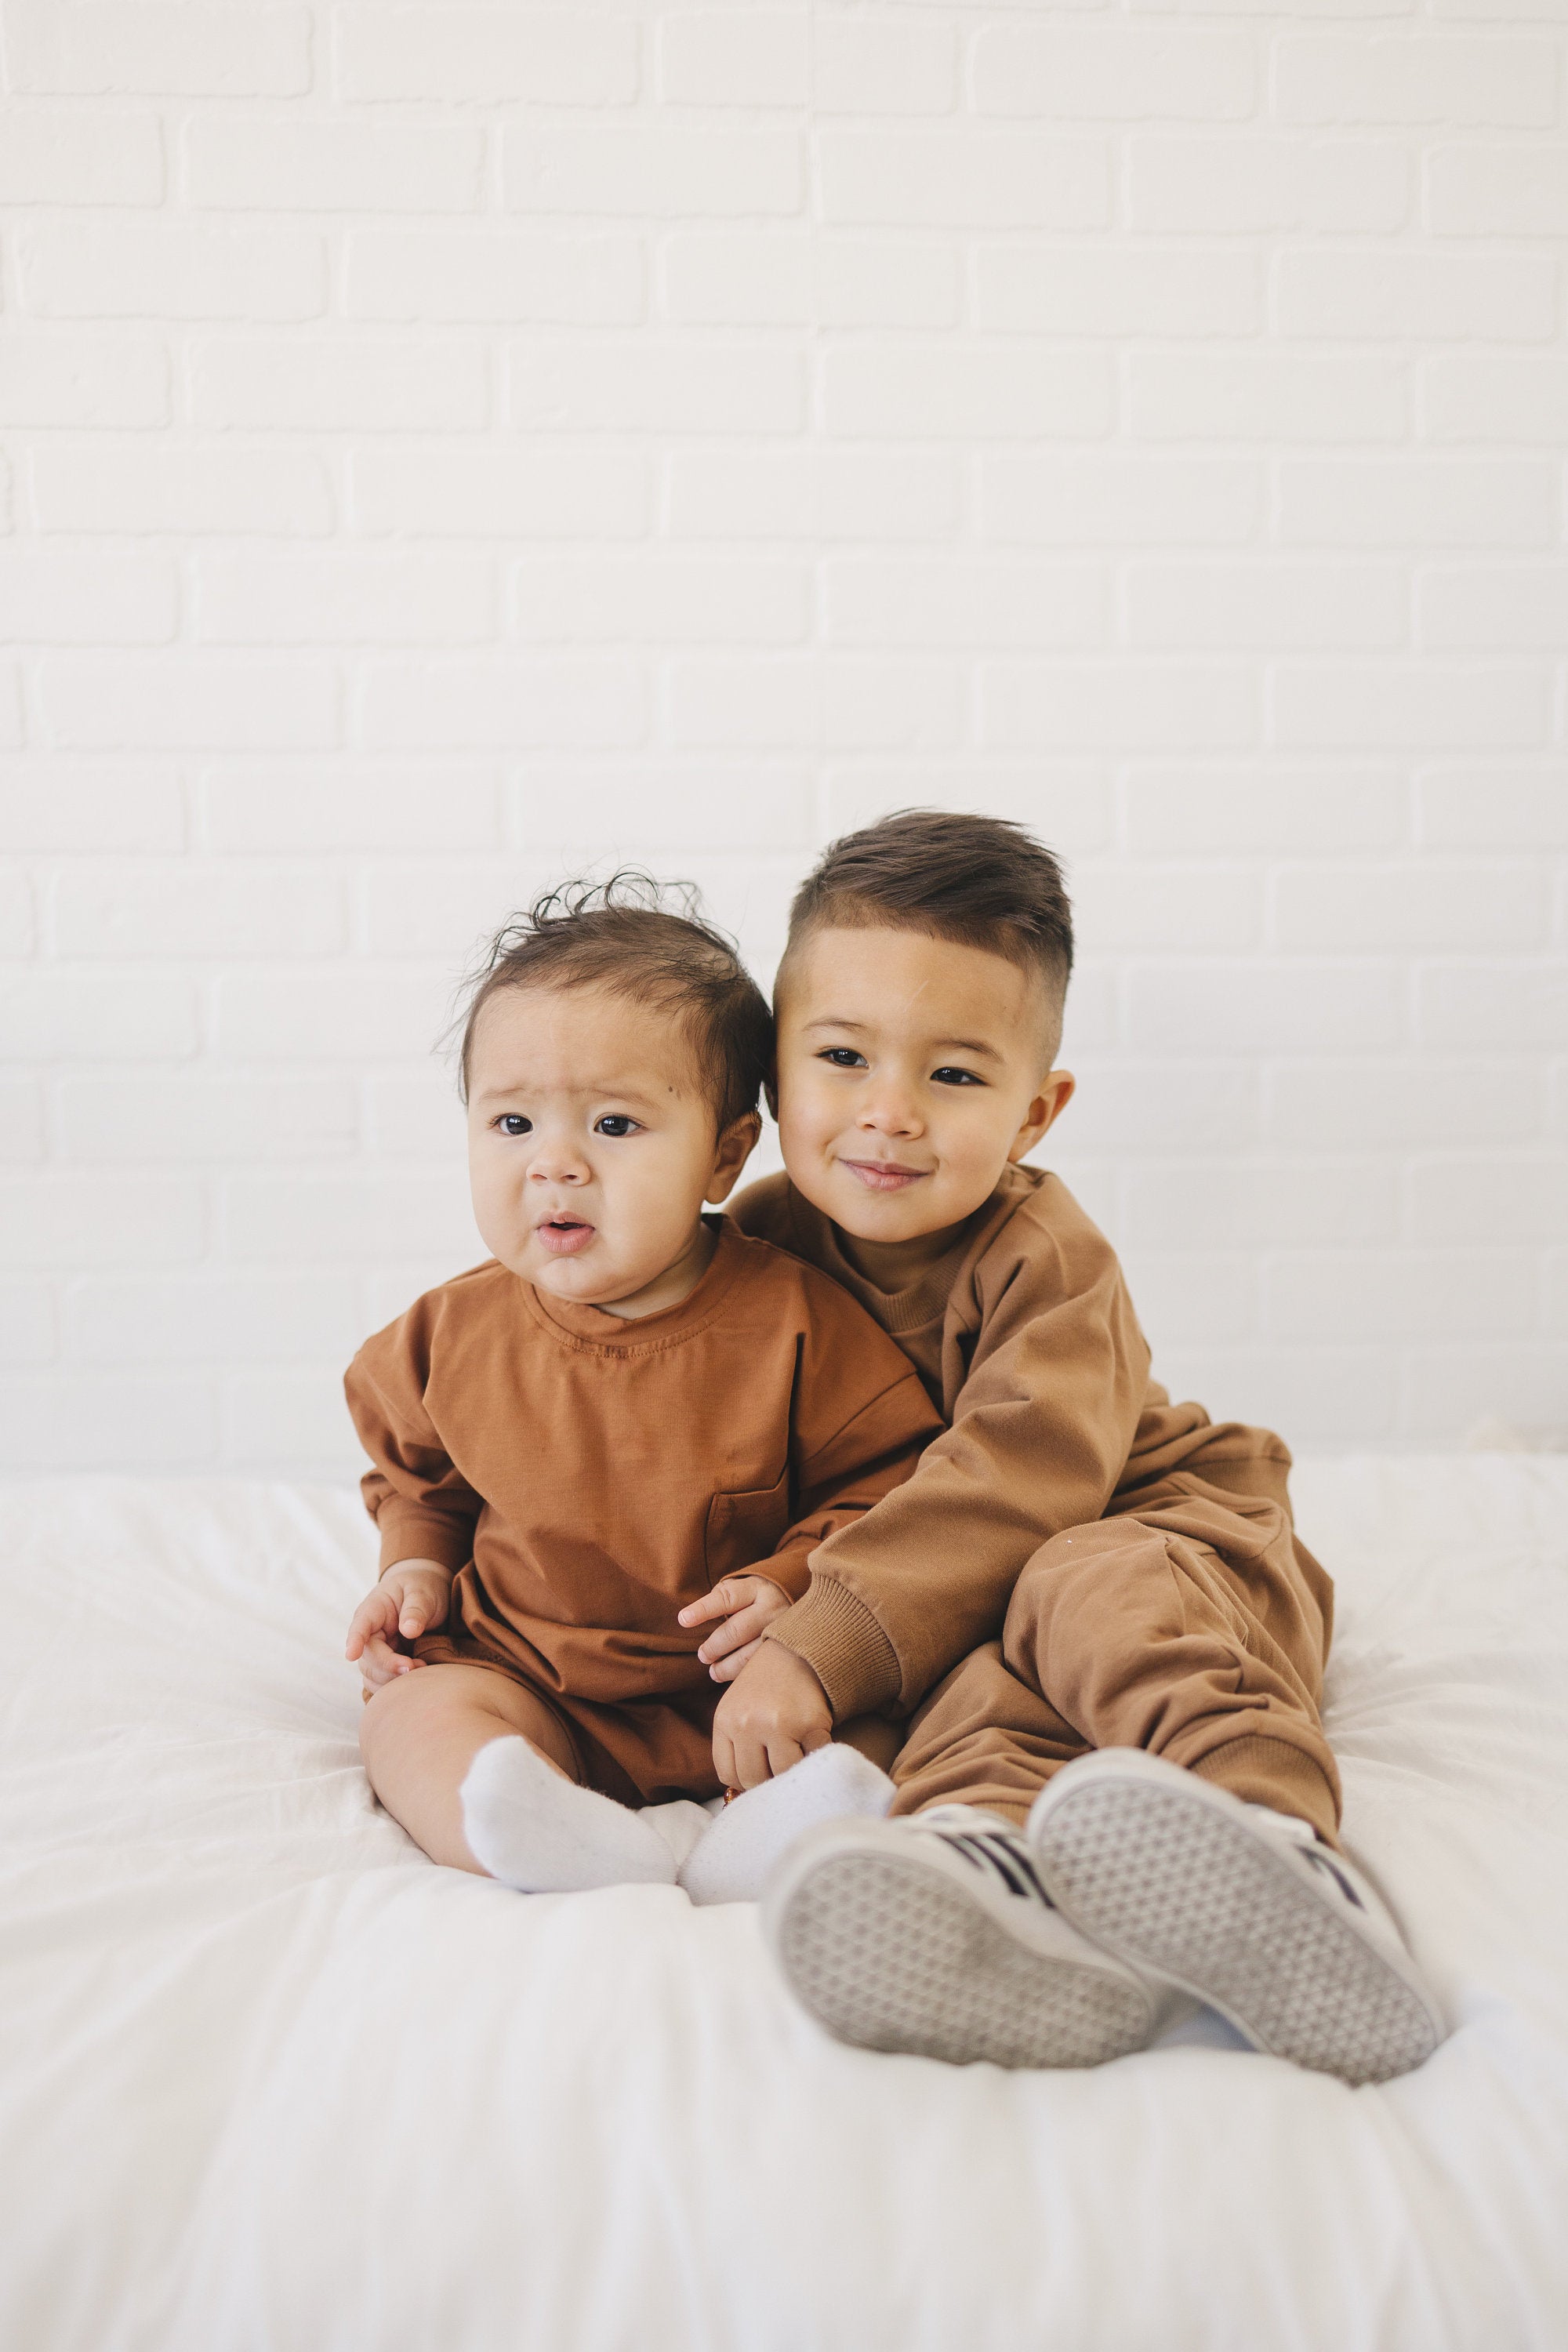 Long-Sleeved Oversized Pocket Tee Romper - LS T-Shirt Romper - Baby Bubble Romper - Spring Winter Baby Clothes - Baby Boy Outfit - Brown